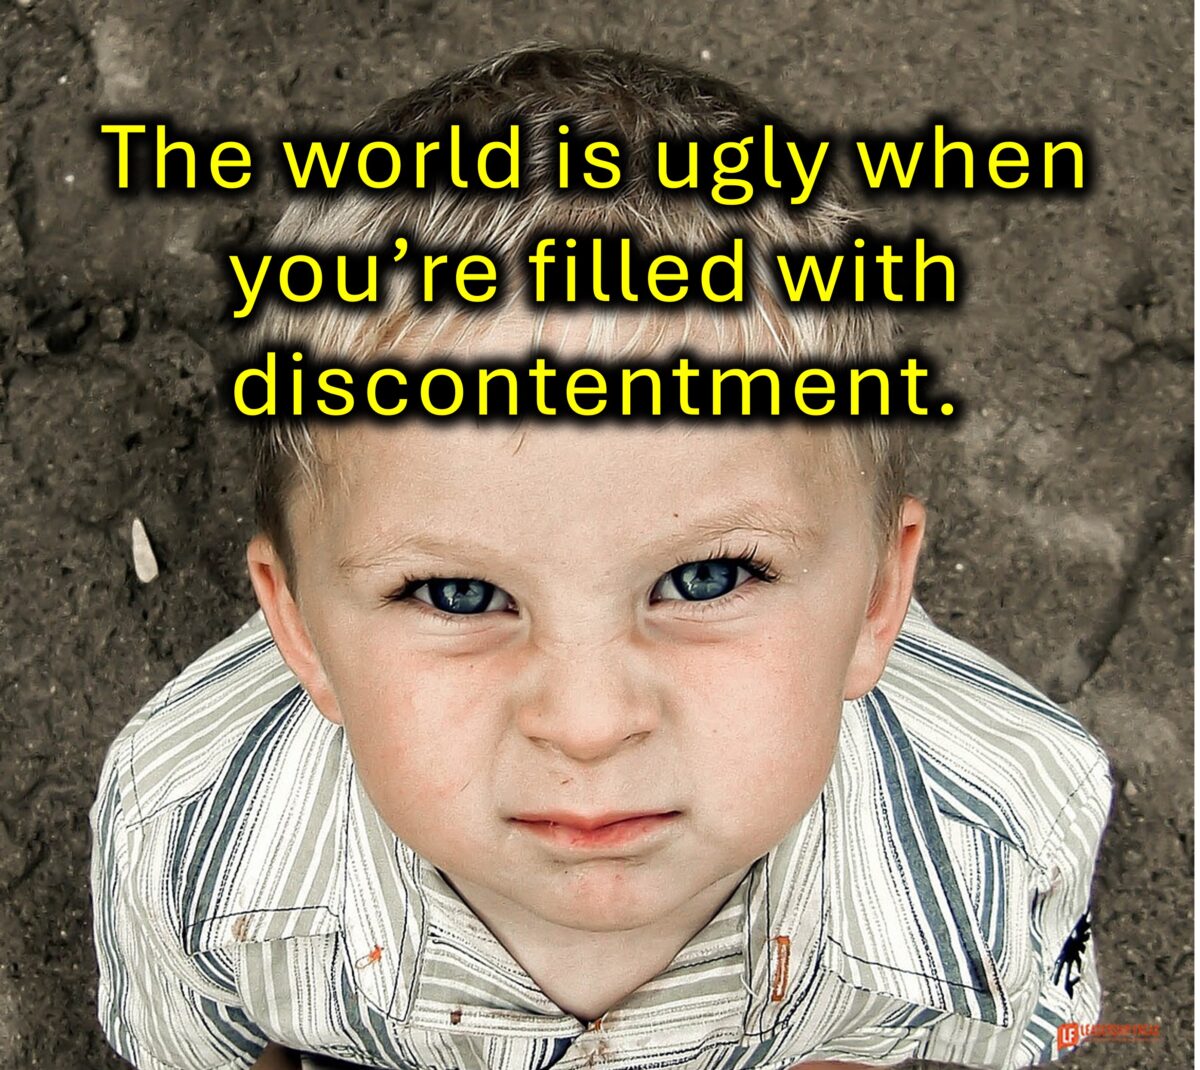 The Right Kind of Discontentment